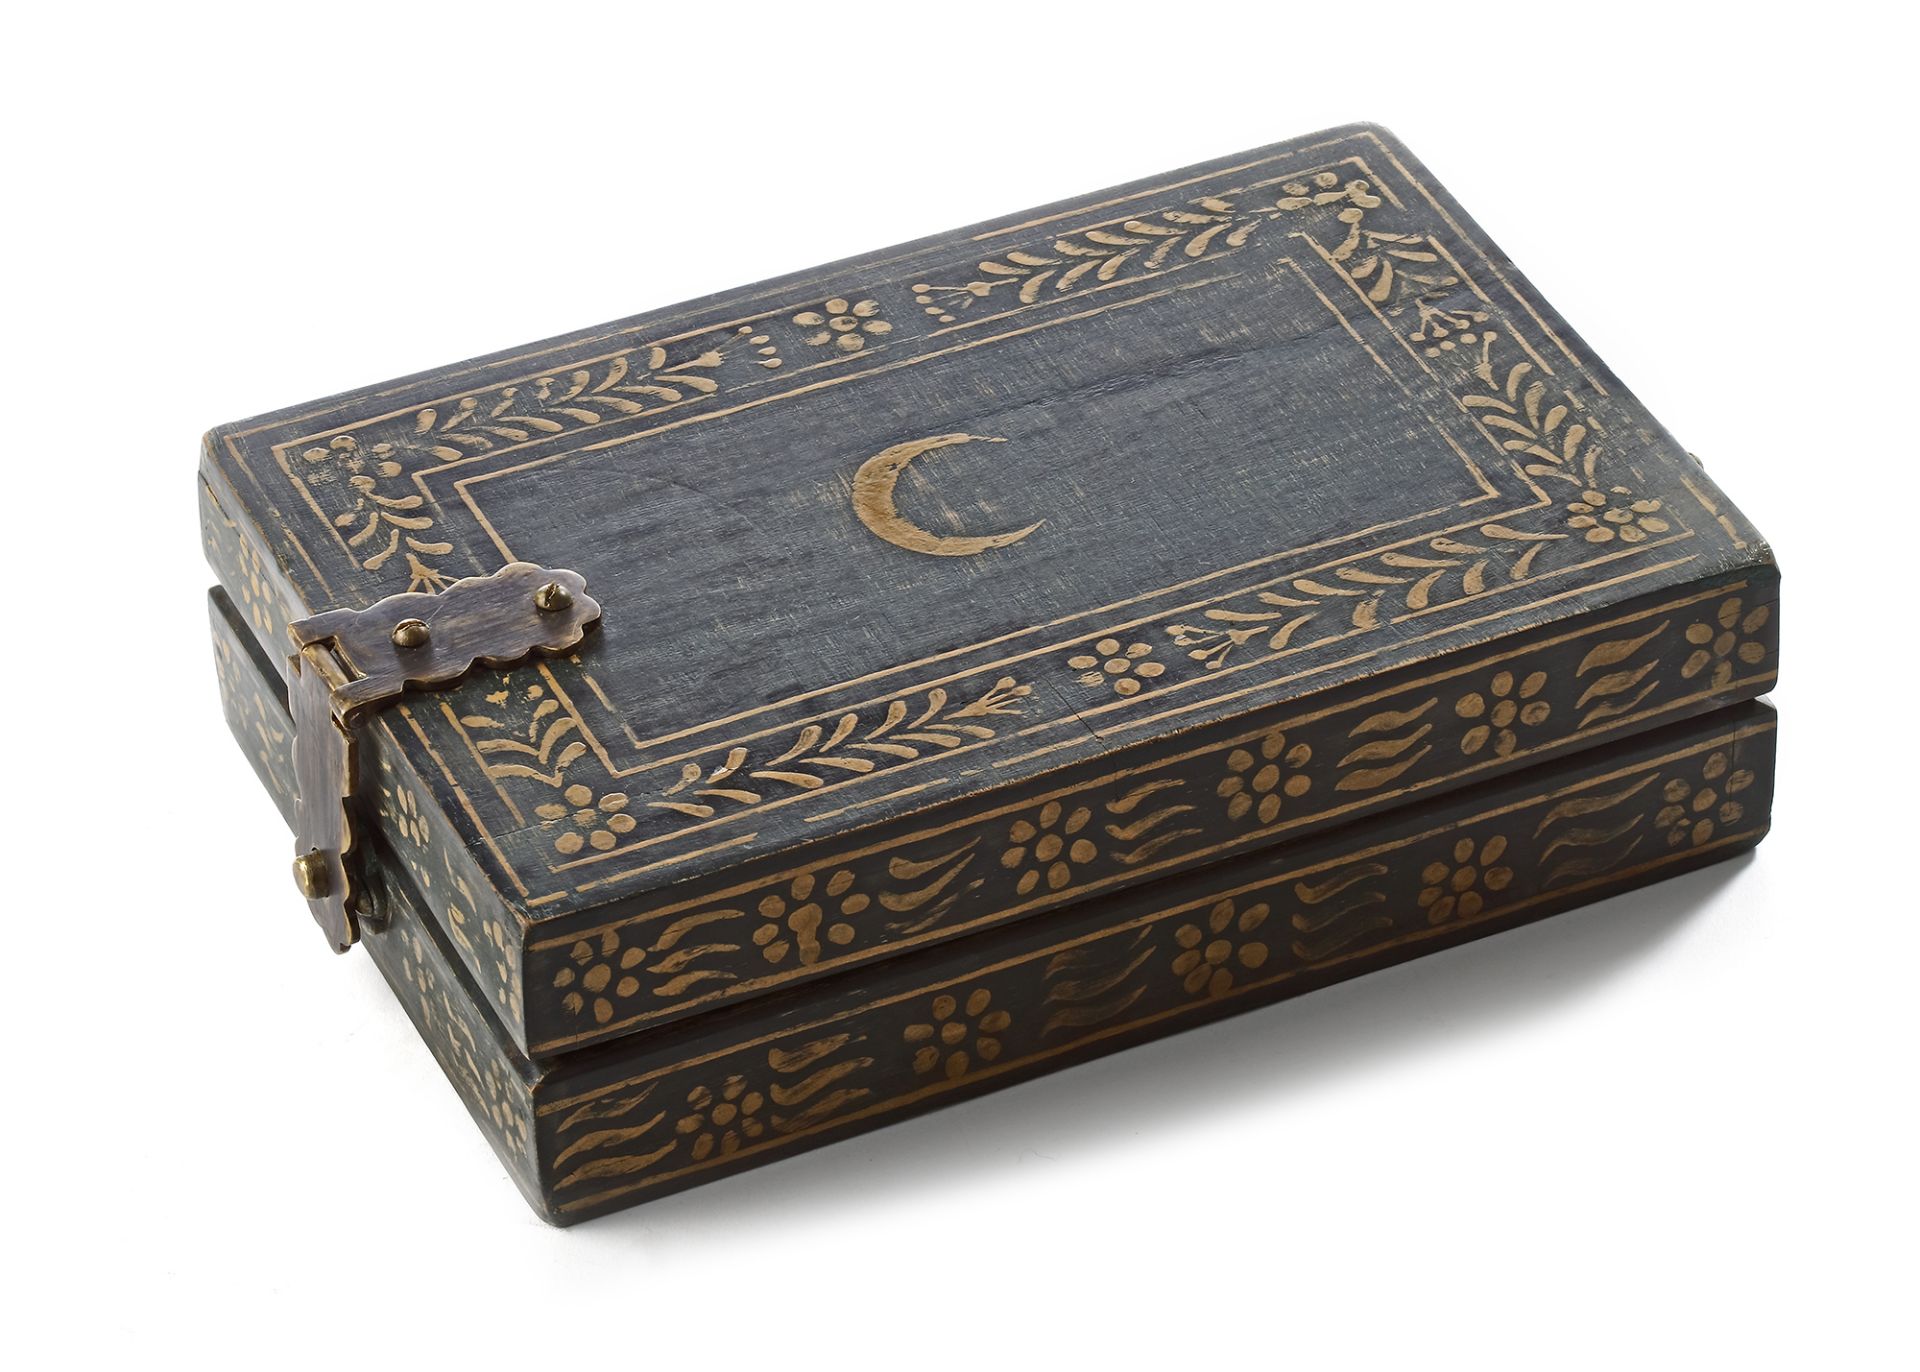 AN OTTOMAN COMPASS AND QIBLA INDICATOR, 19TH CENTURY - Image 9 of 10